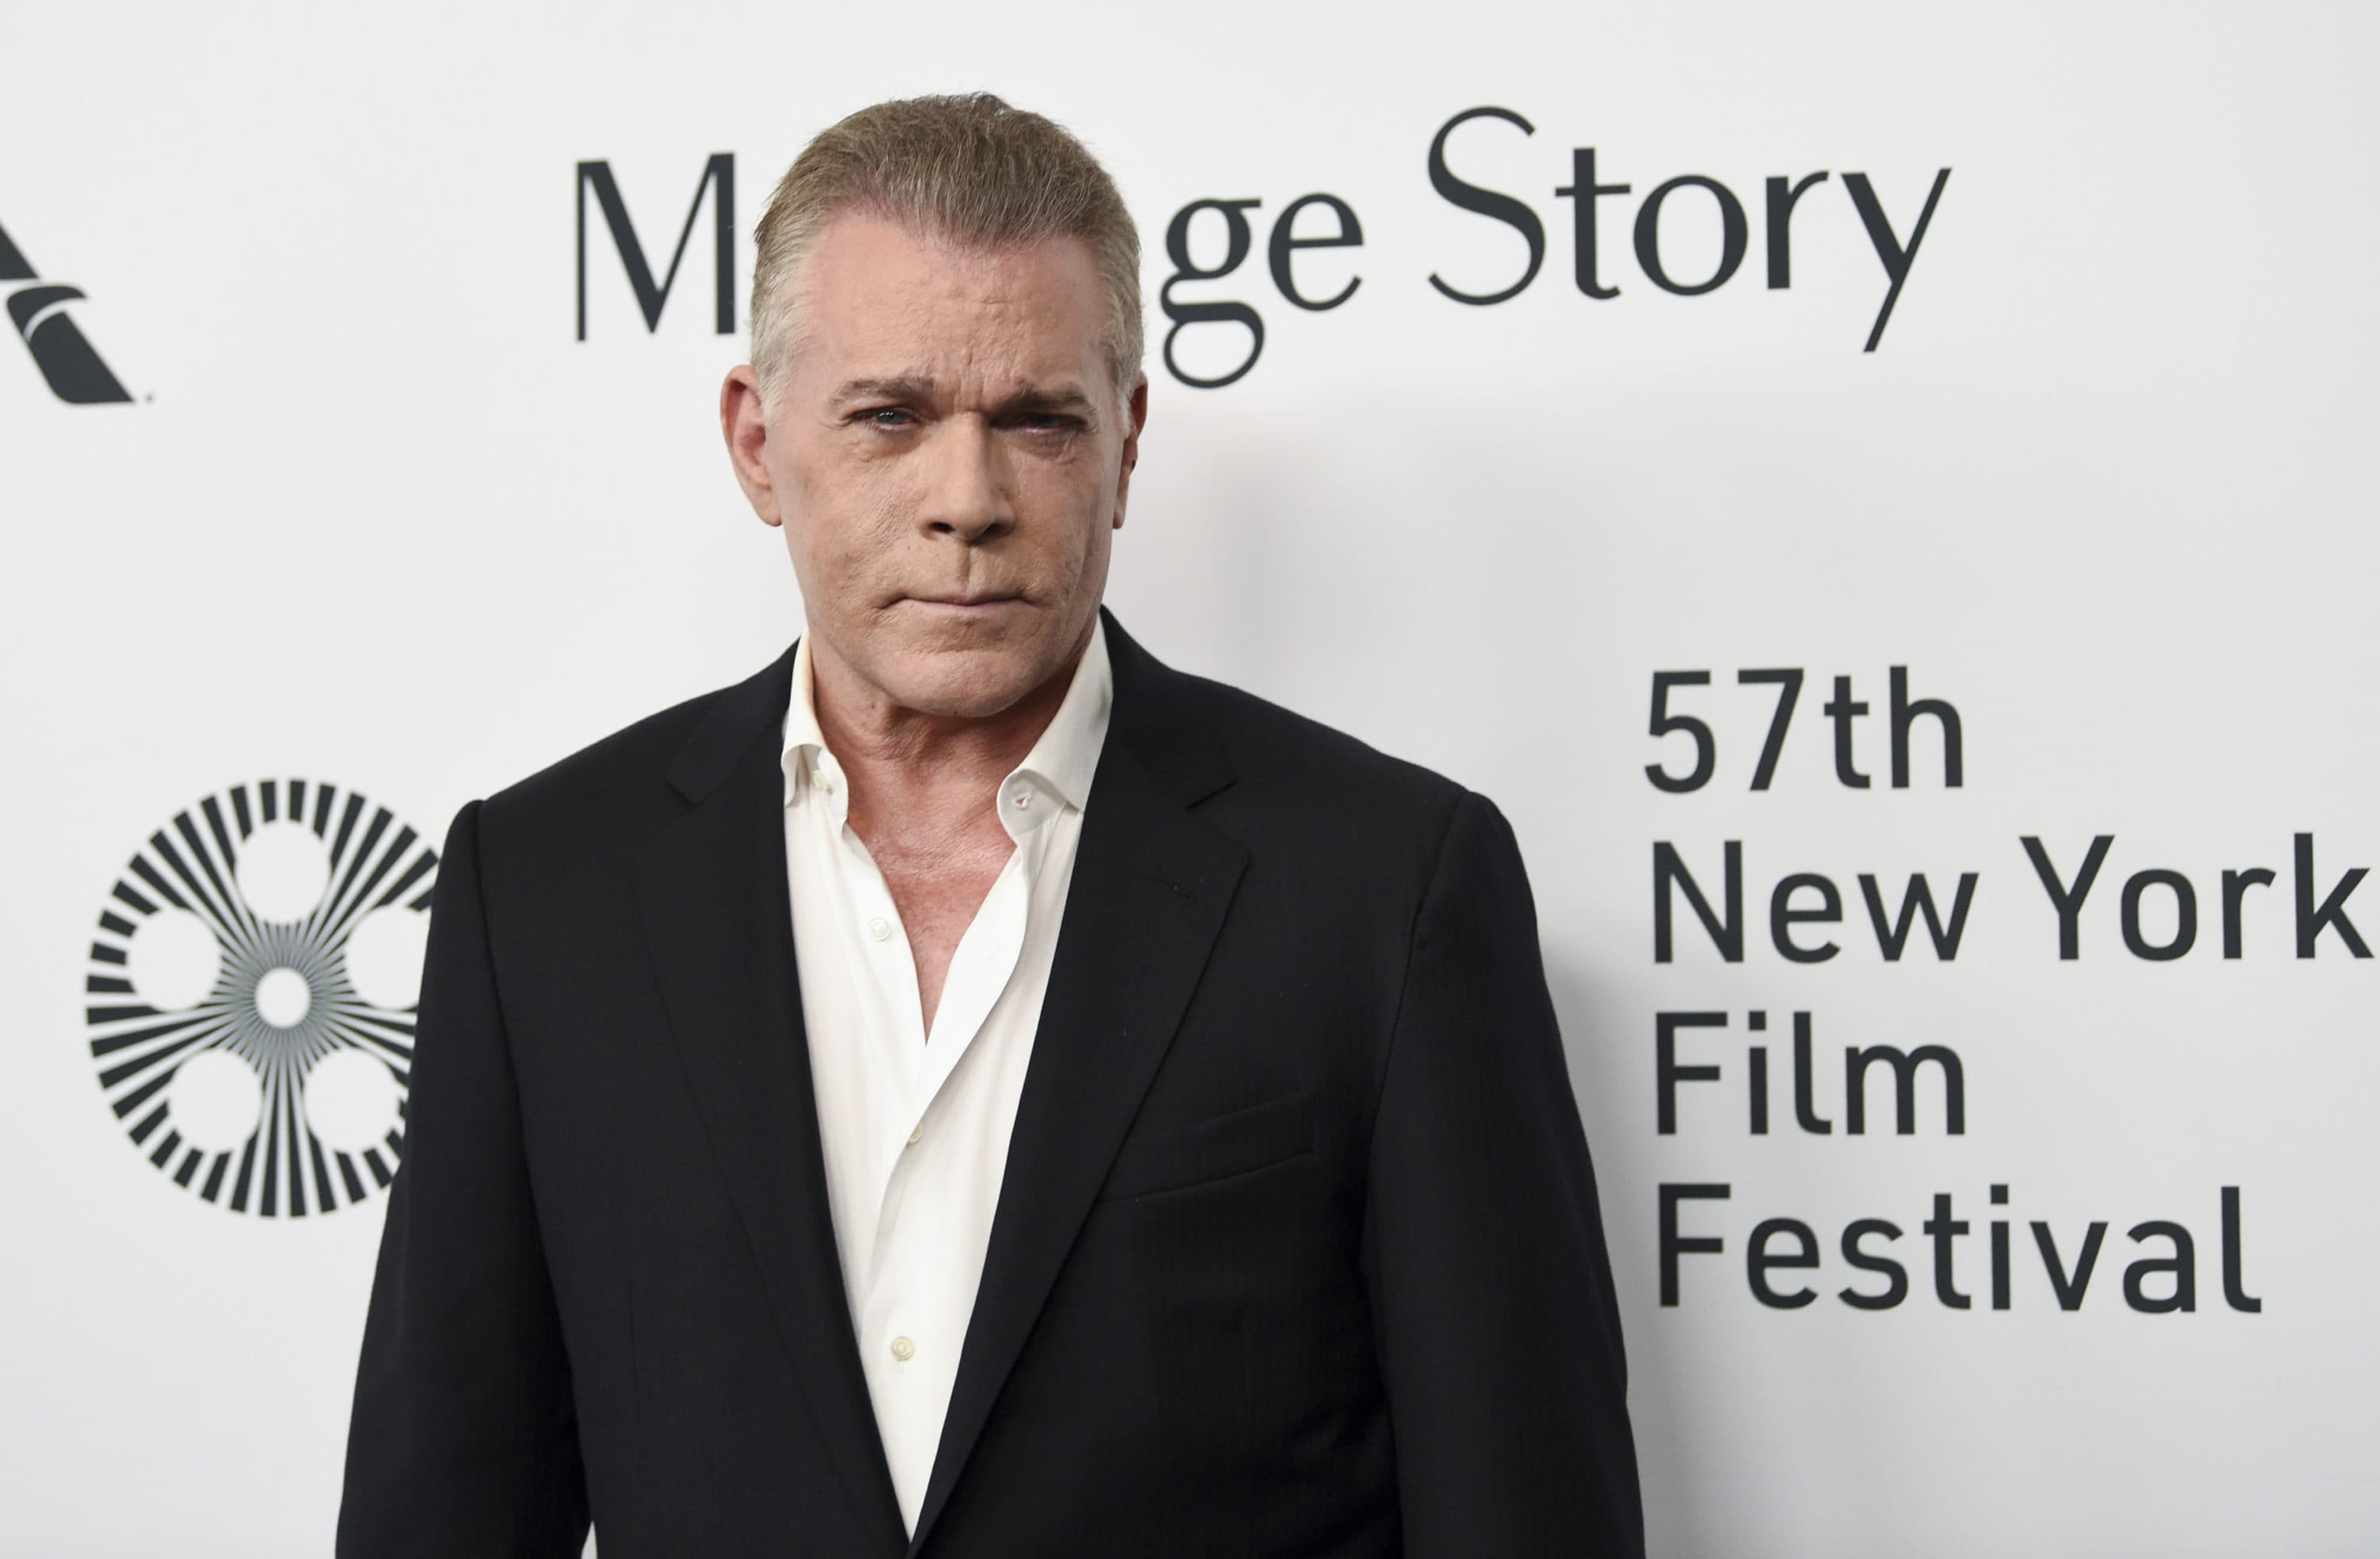 Actor Ray Liotta attends the &quot;Marriage Story&quot; premiere during the 57th New York Film Festival on Friday, Oct. 4, 2019. (Evan Agostini/Invision/AP)